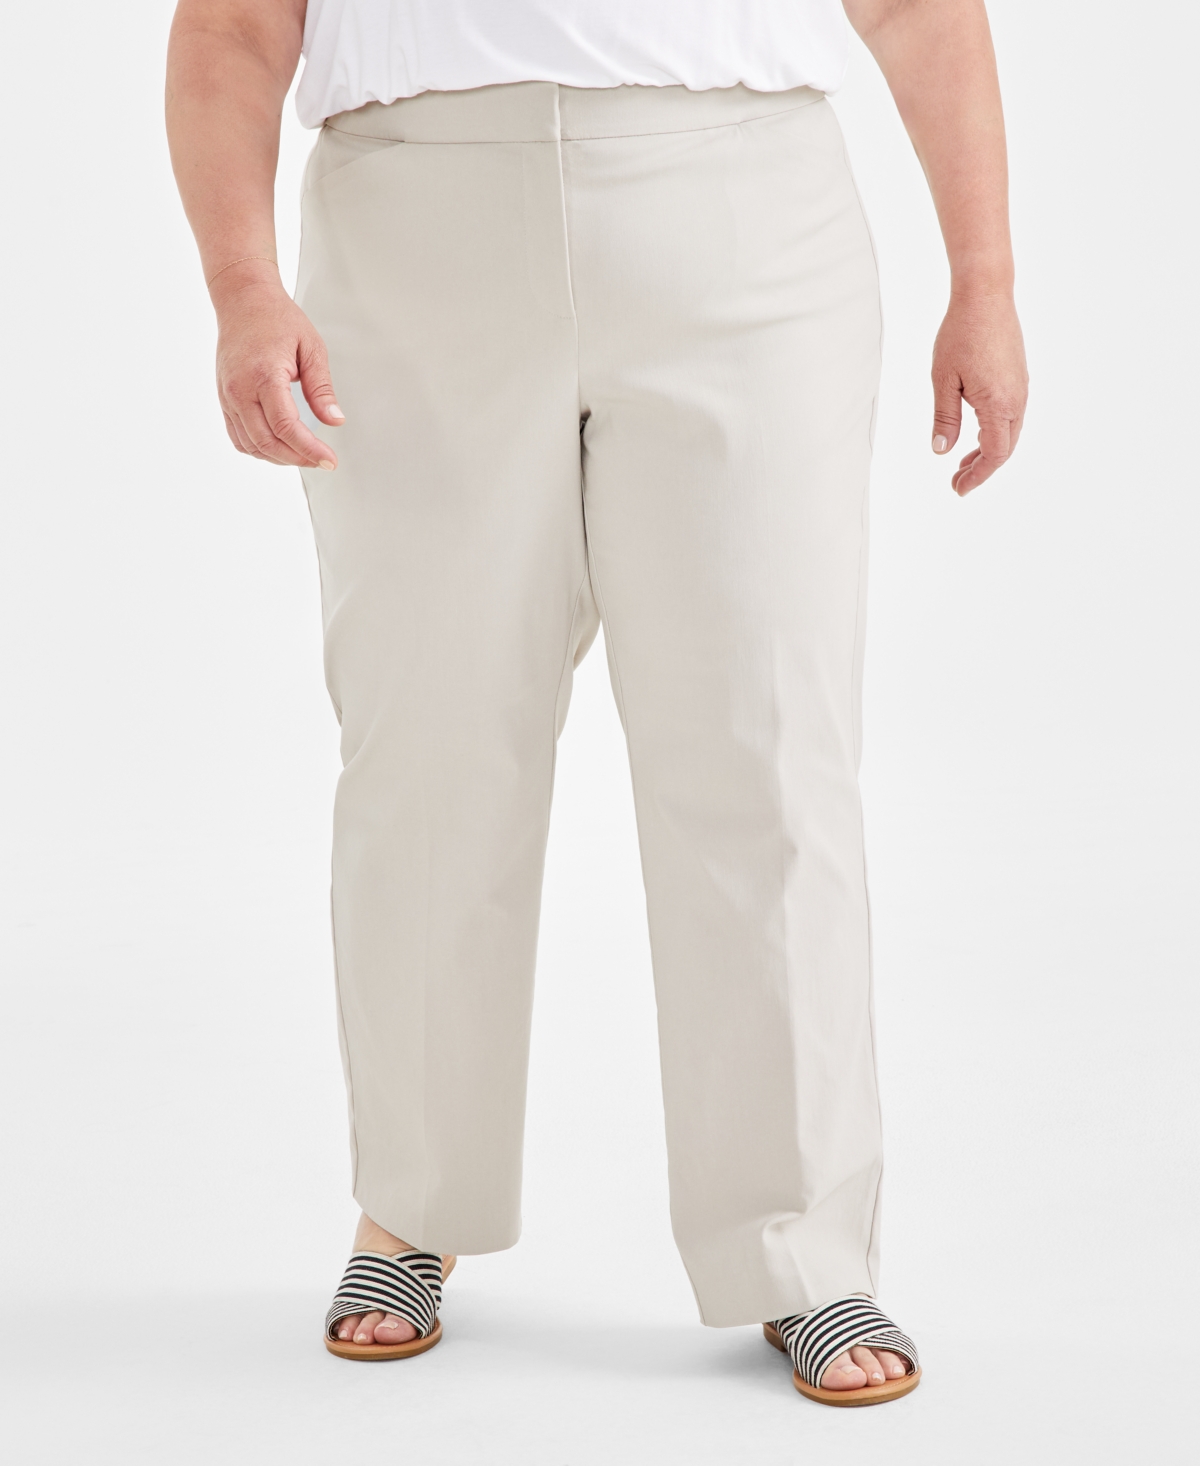 Plus Size Curvy-Fit Straight-Leg Pants, Created for Macy's - Ruby Slippers